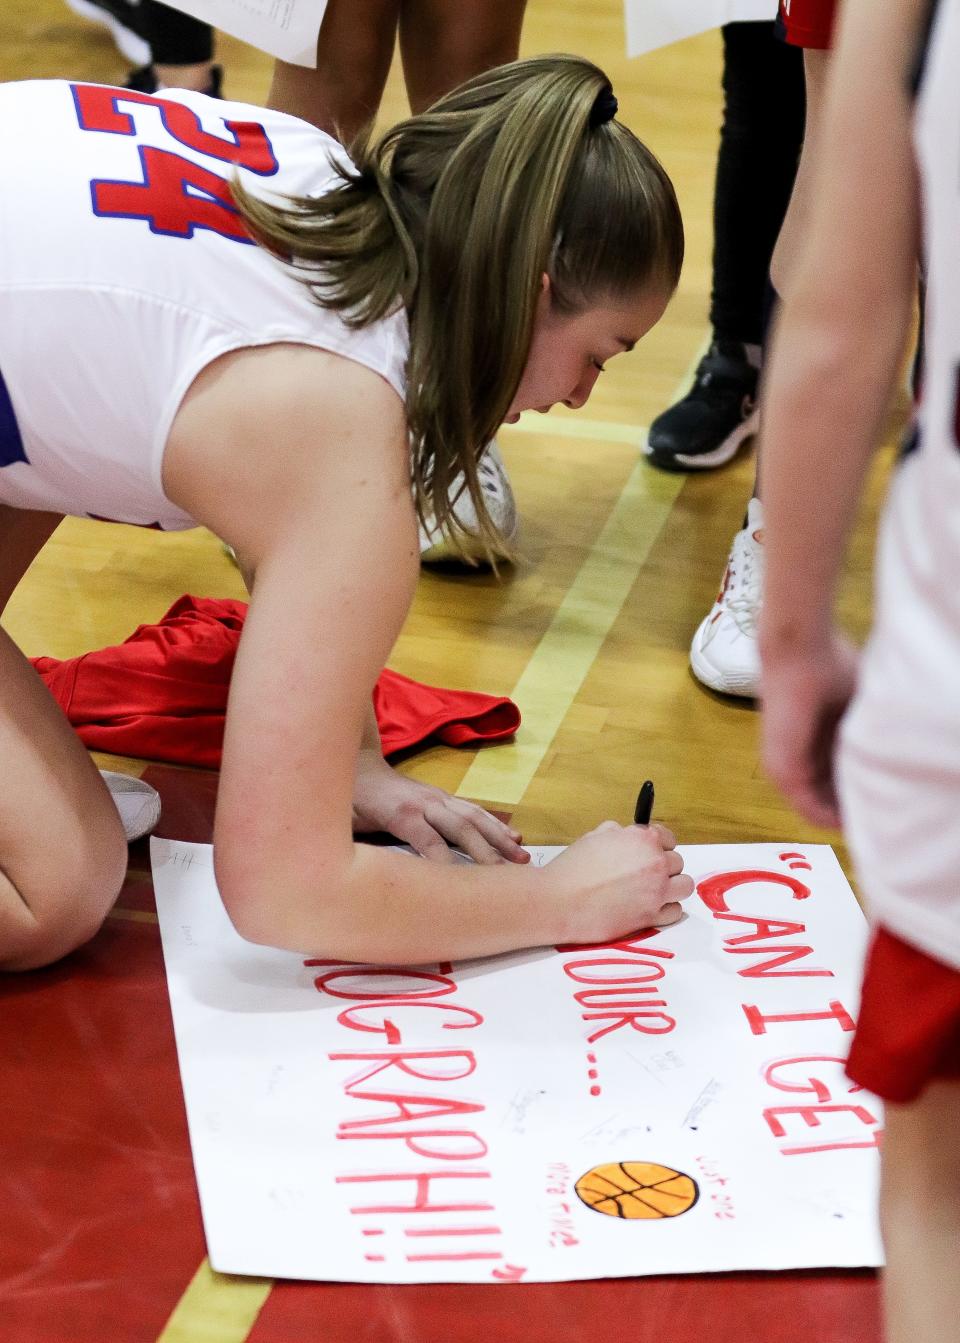 Bridgewater-Raynham's Jenna Micciantuono signs an autograph for young fans after a game against Dartmouth on Monday, Feb. 13, 2023.